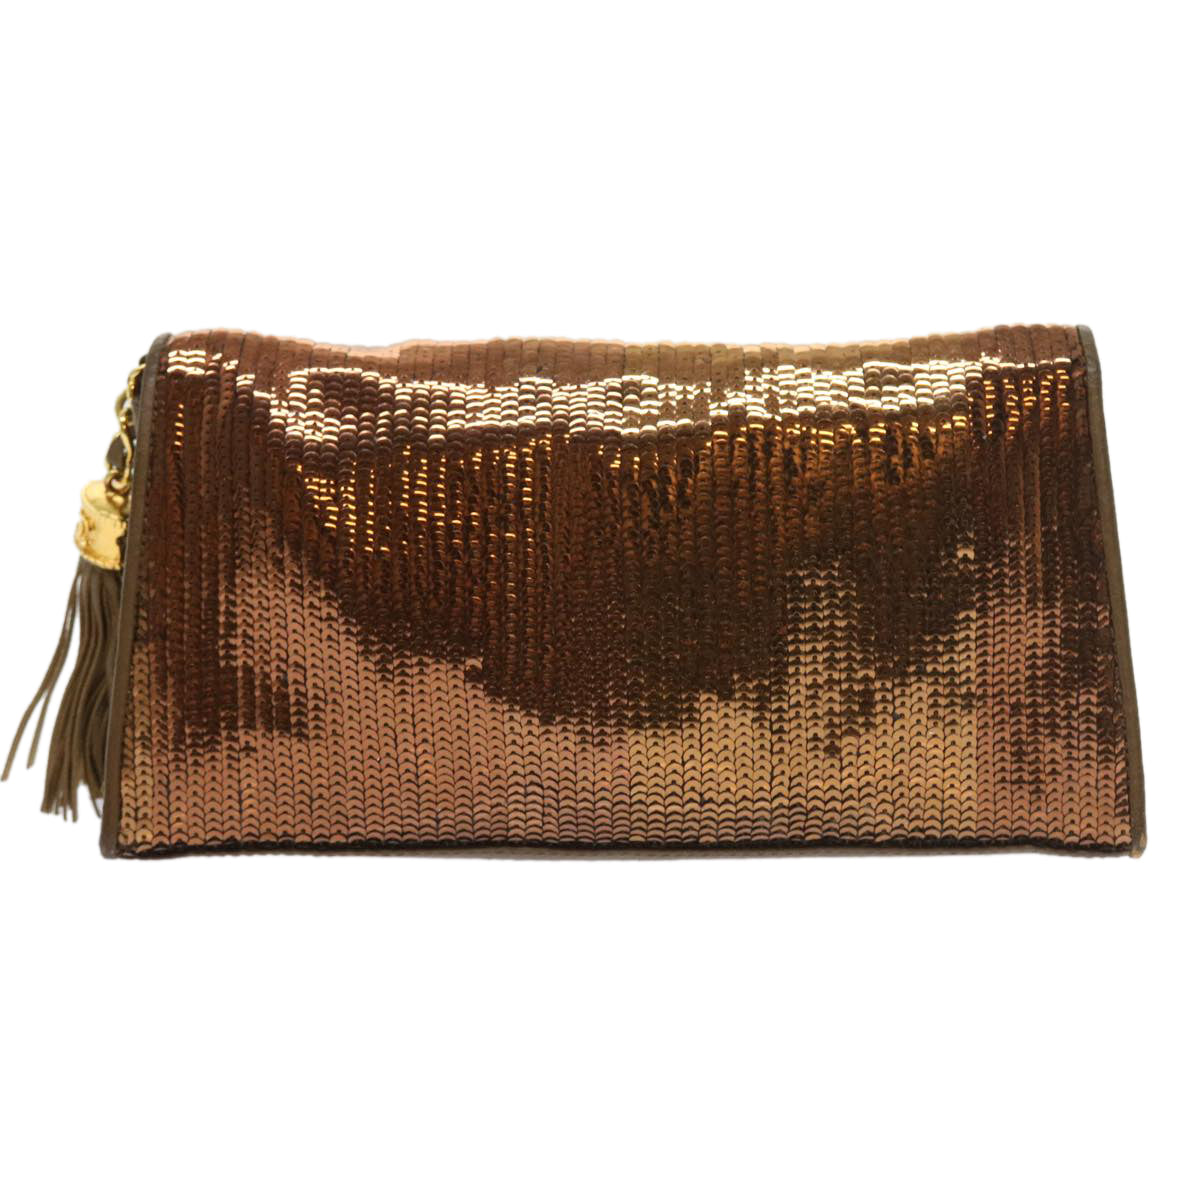 CHANEL Sequin Clutch Bag Leather Bronze CC Auth bs9383